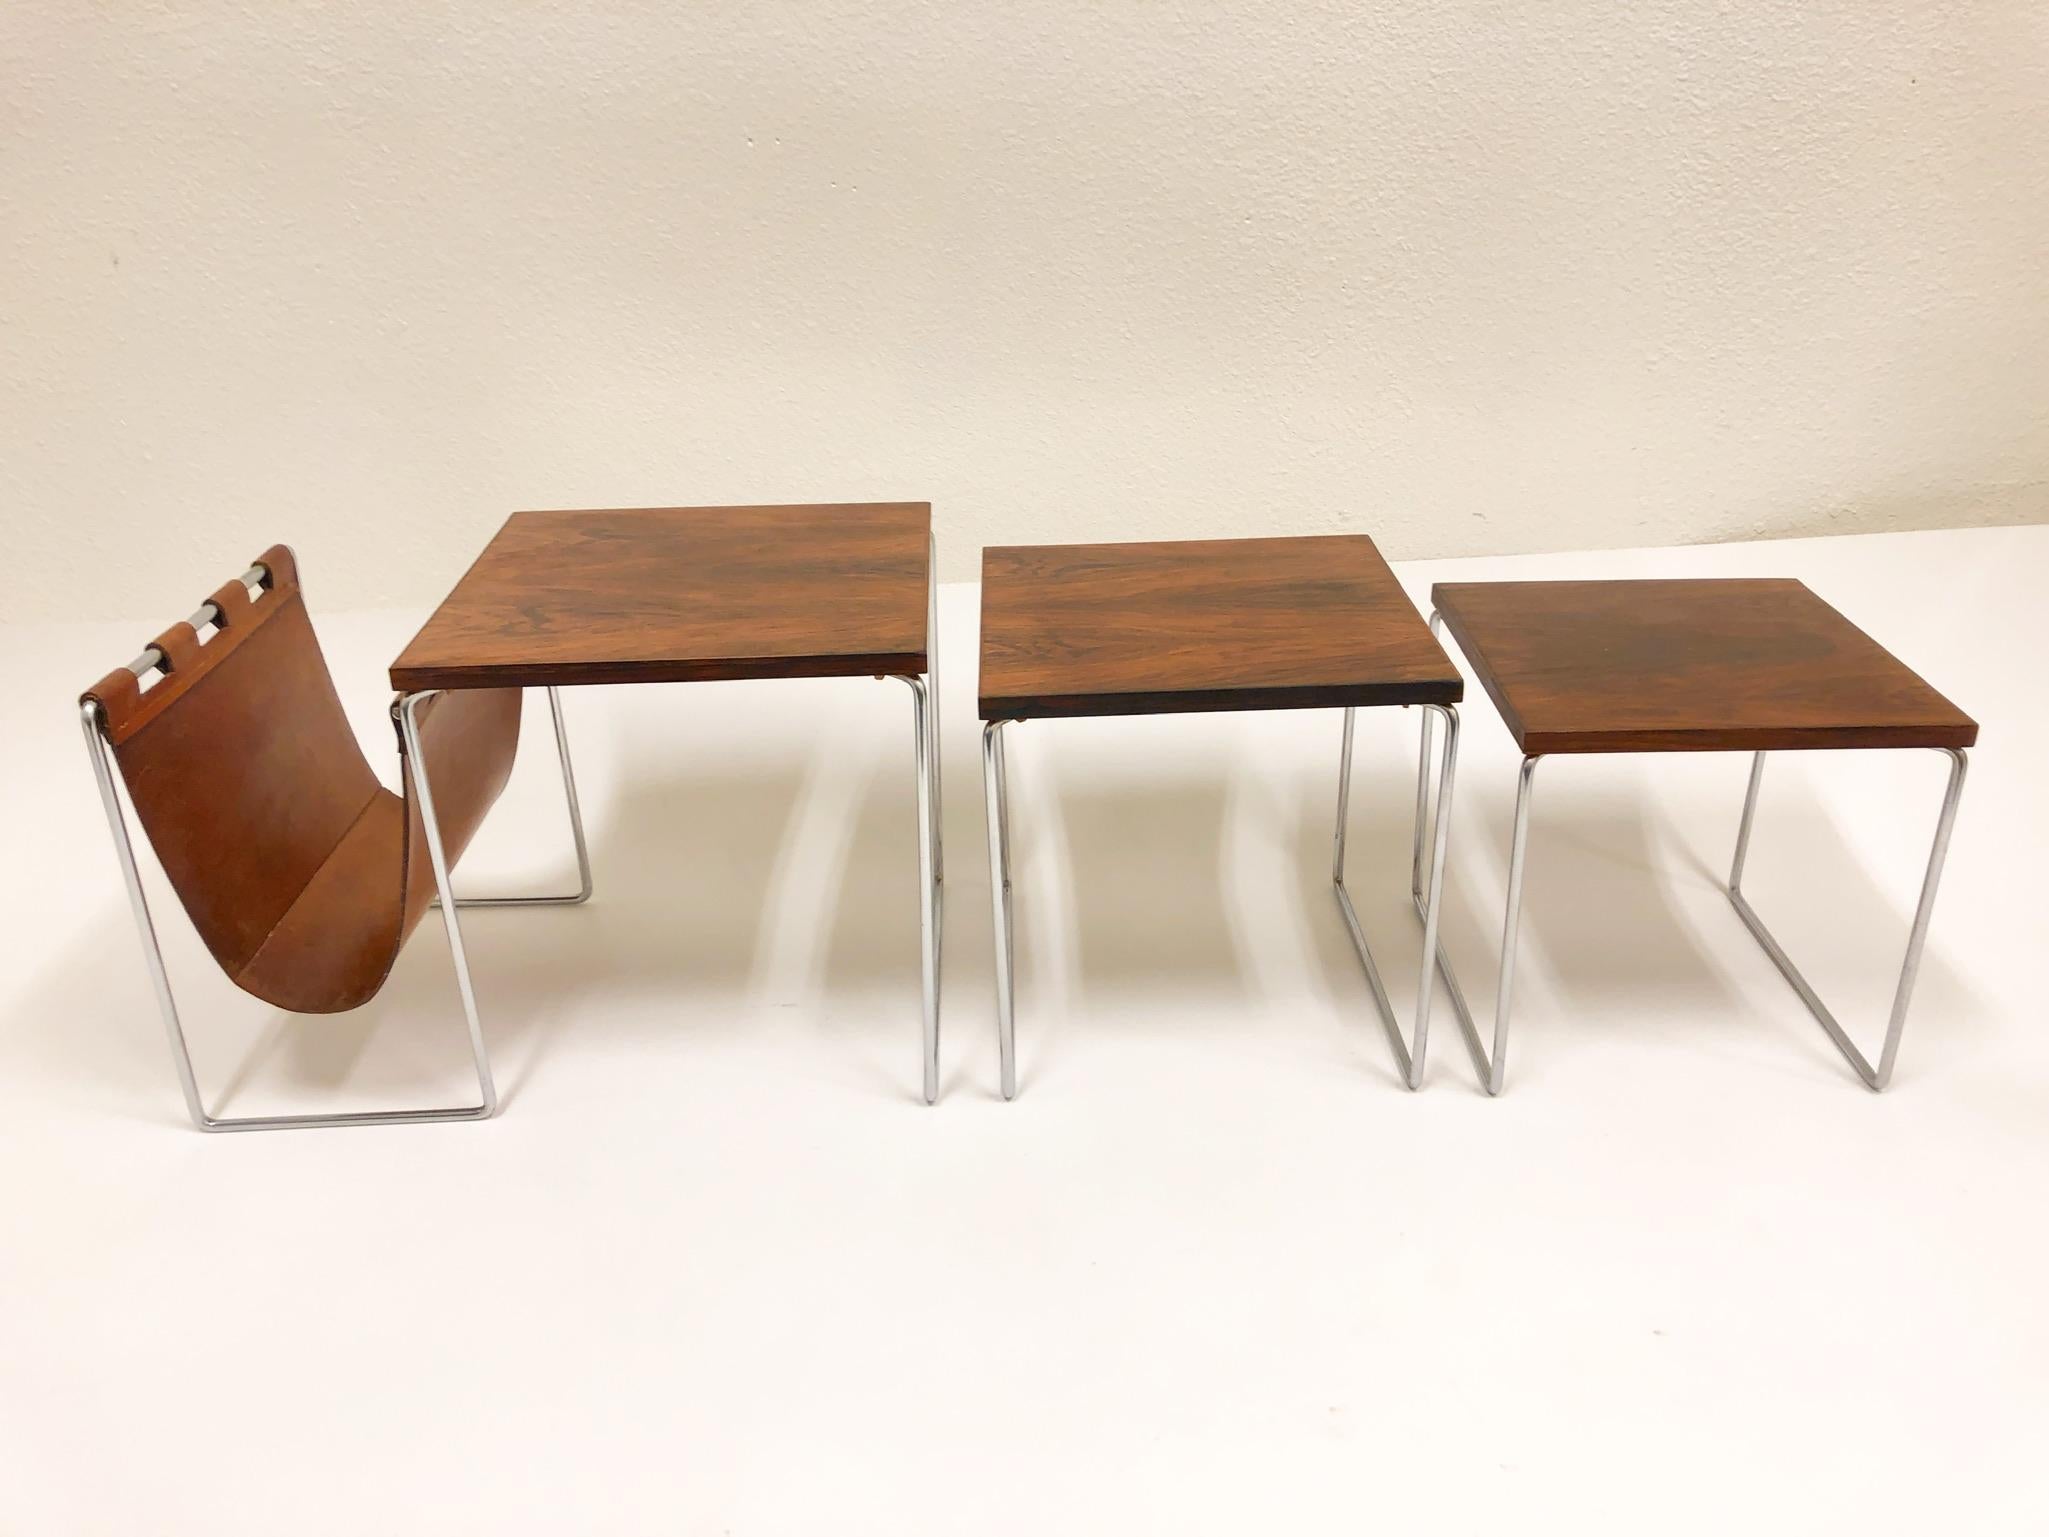 Rosewood and Chrome Nesting Tables (Mitte des 20. Jahrhunderts)